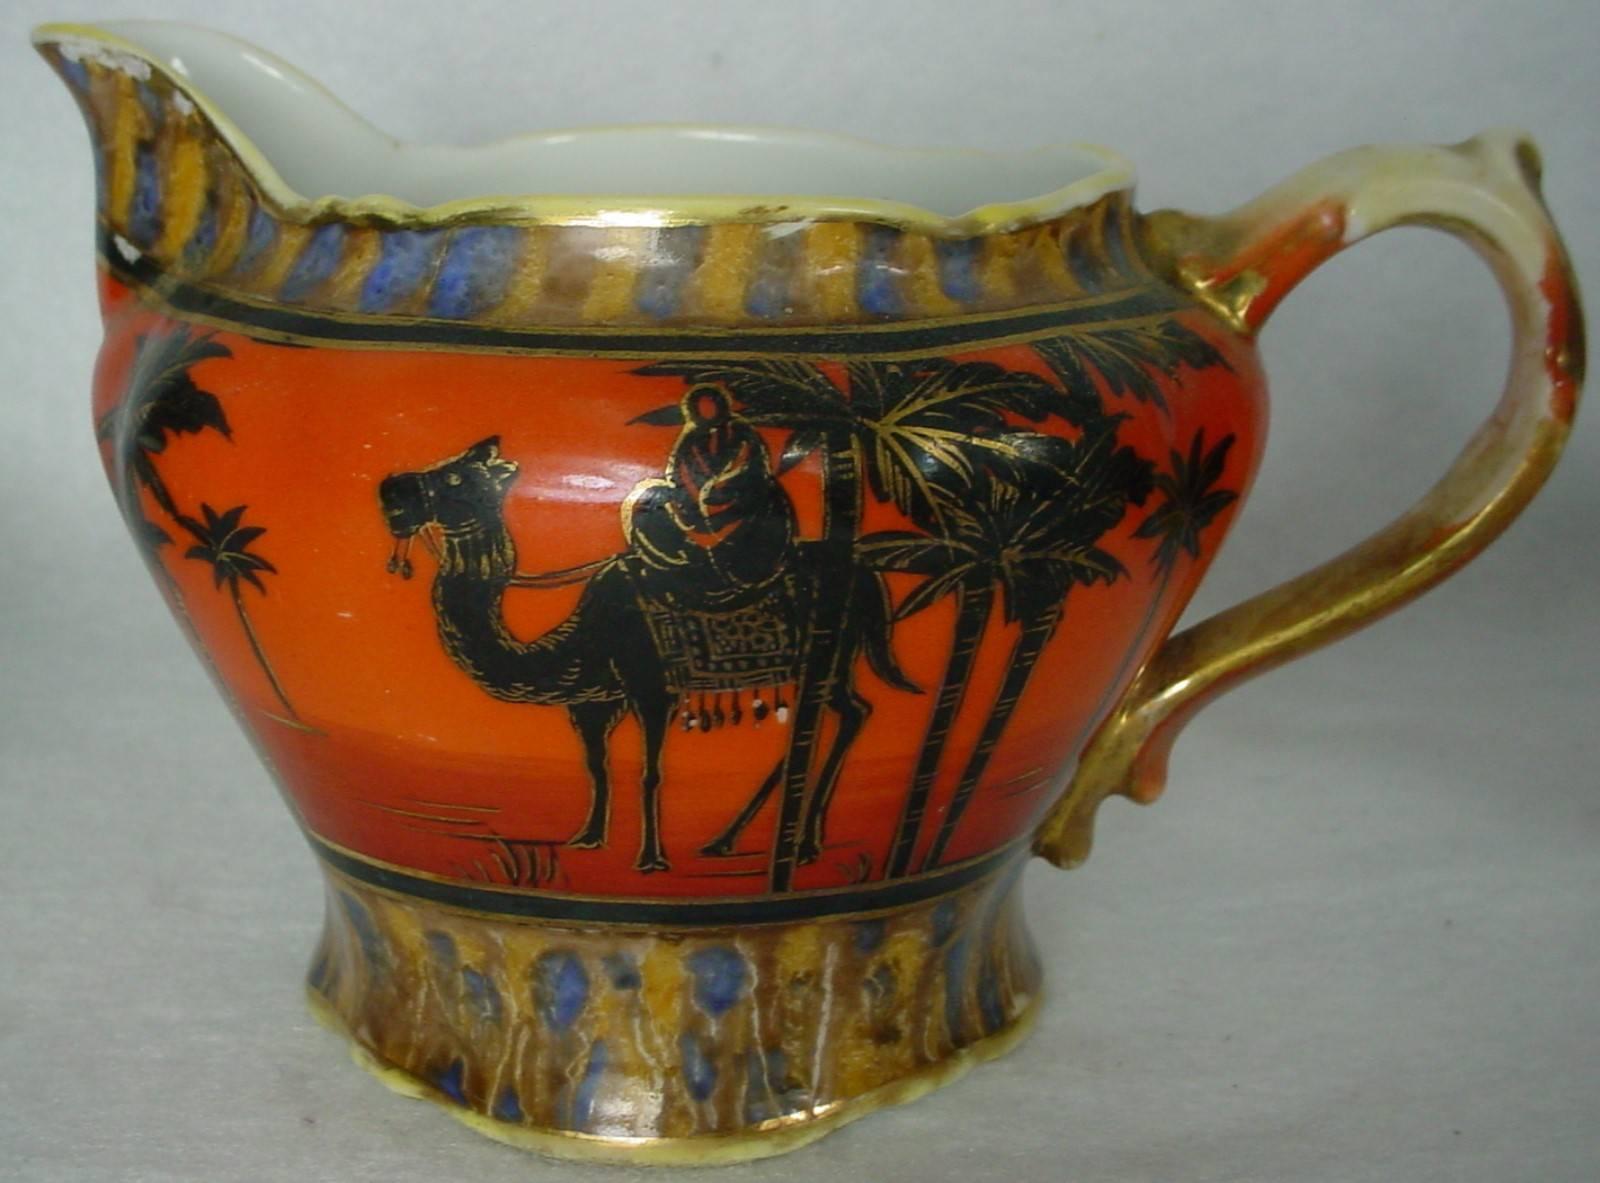 Noritake China Desert Scene Man on Camel Teapot, Creamer, Sugar Bowl, and 1 Cup In Good Condition For Sale In St. Petersburg, FL